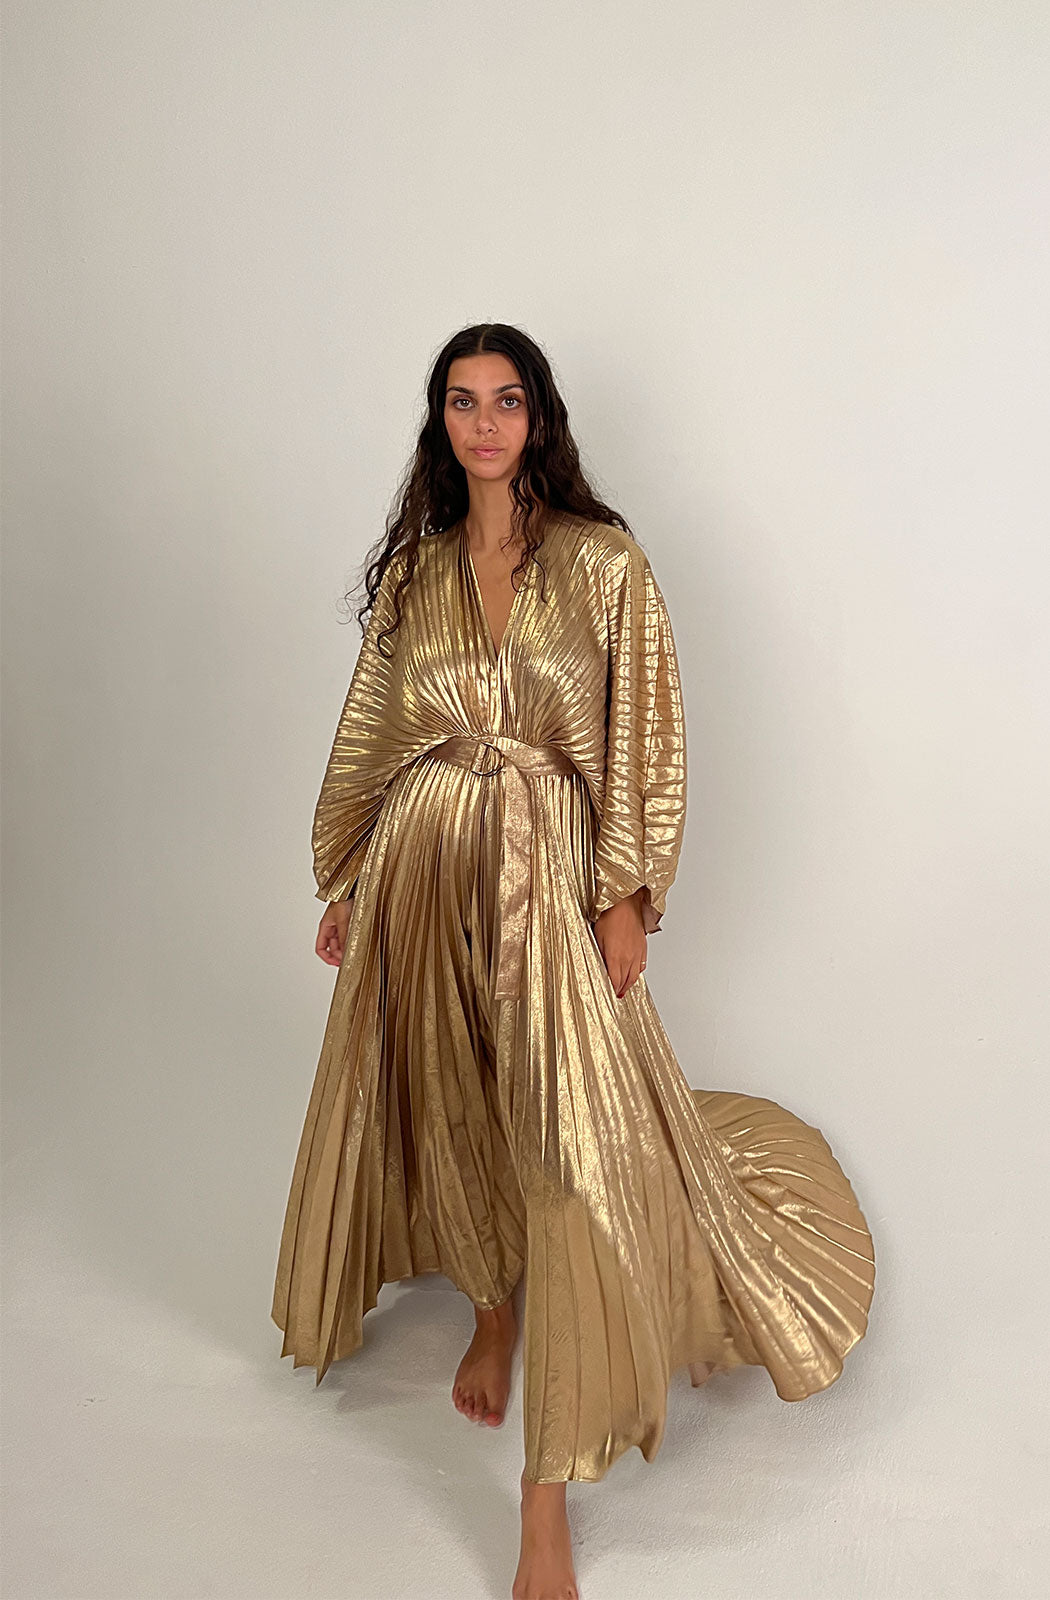 Acler Women's Natural Westover Dress  The Westover Dress in Gold by Acler is a maxi dress crafted in a gold pleated fabrication featuring full length sleeves, a plunging neckline, open back, and statement belt. 100% Polyester.